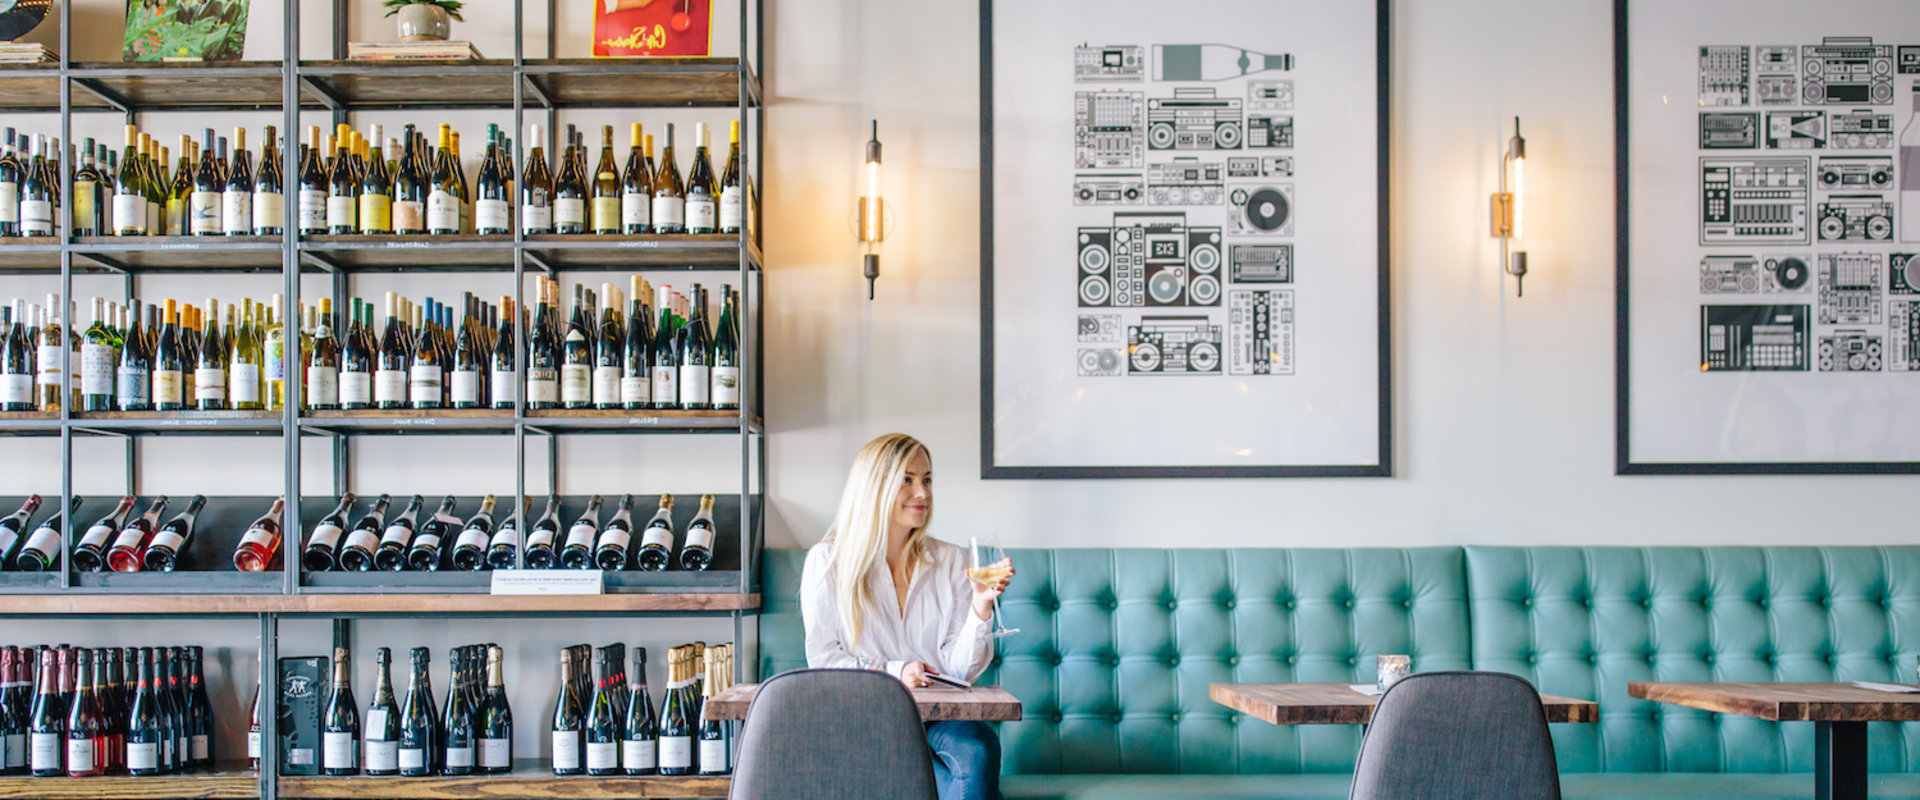 Exploring the Wine Bars in Chandler, AZ: A Food Lover's Guide